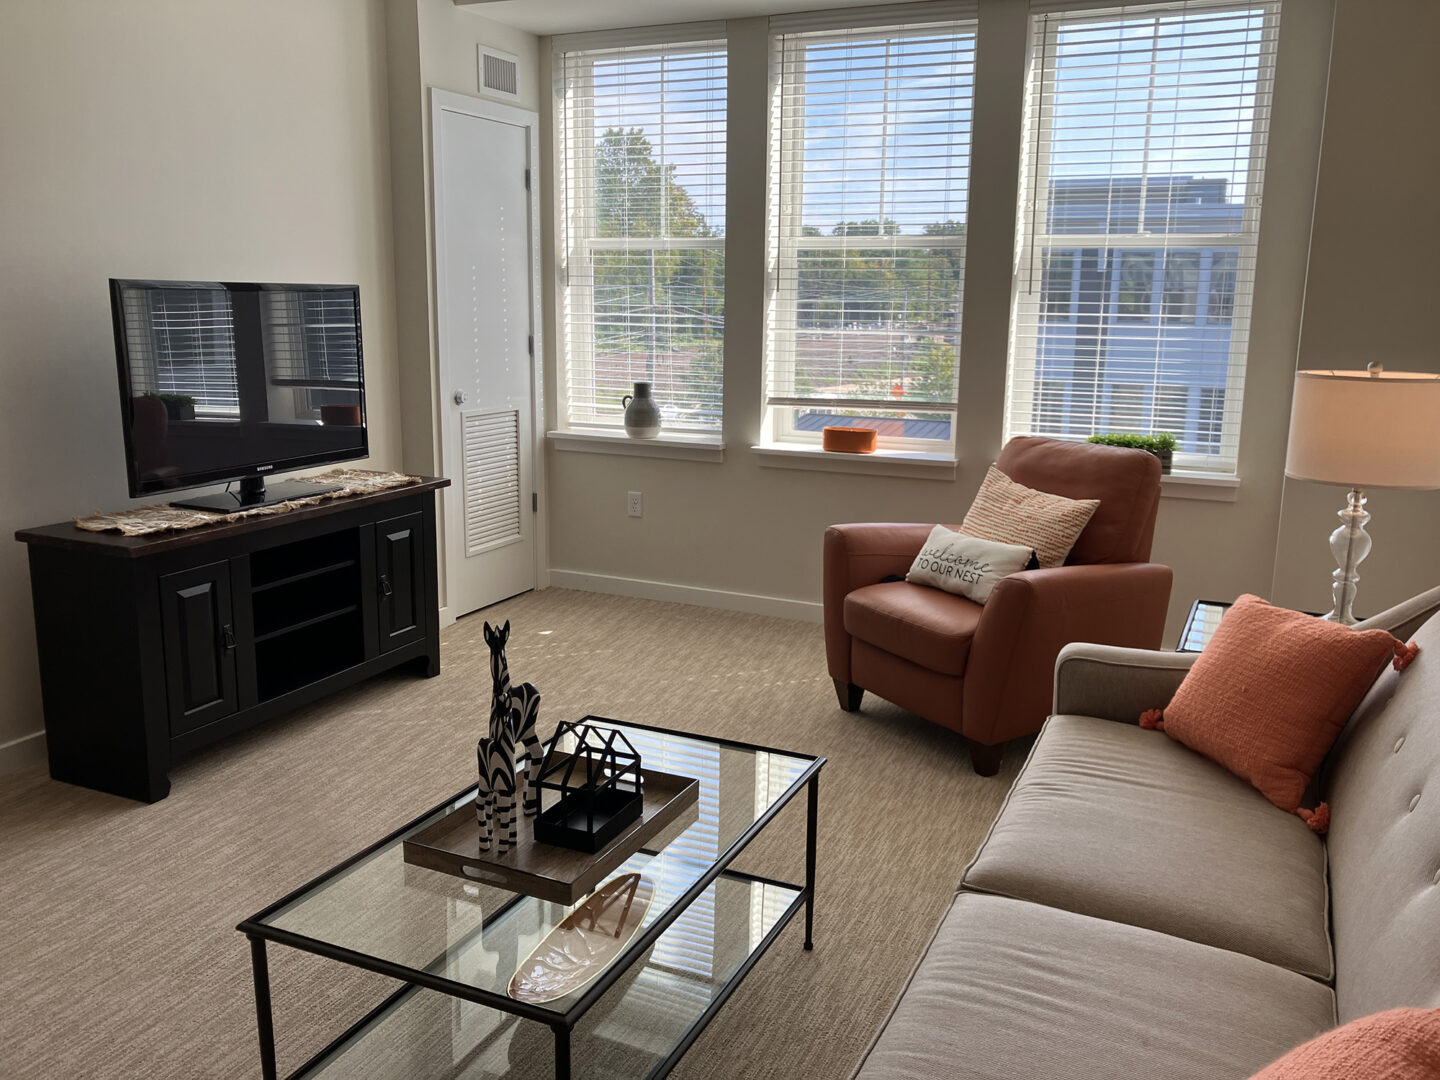 Daylesford Crossing - Deluxe 1BR - Living Room